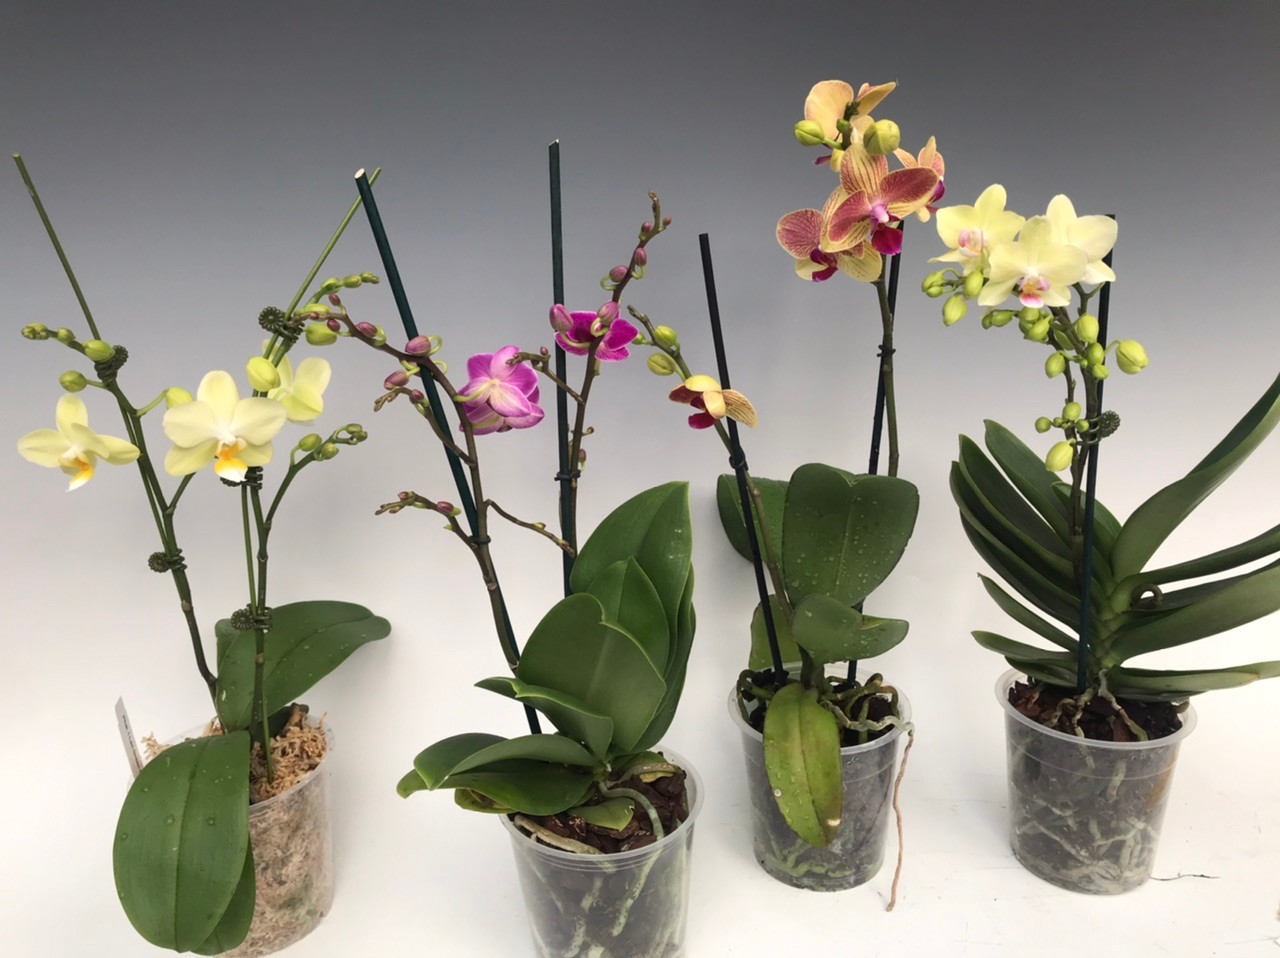 Phalaenopsis Hybrid Multifloral Type (Our Choice) - OrchidWeb